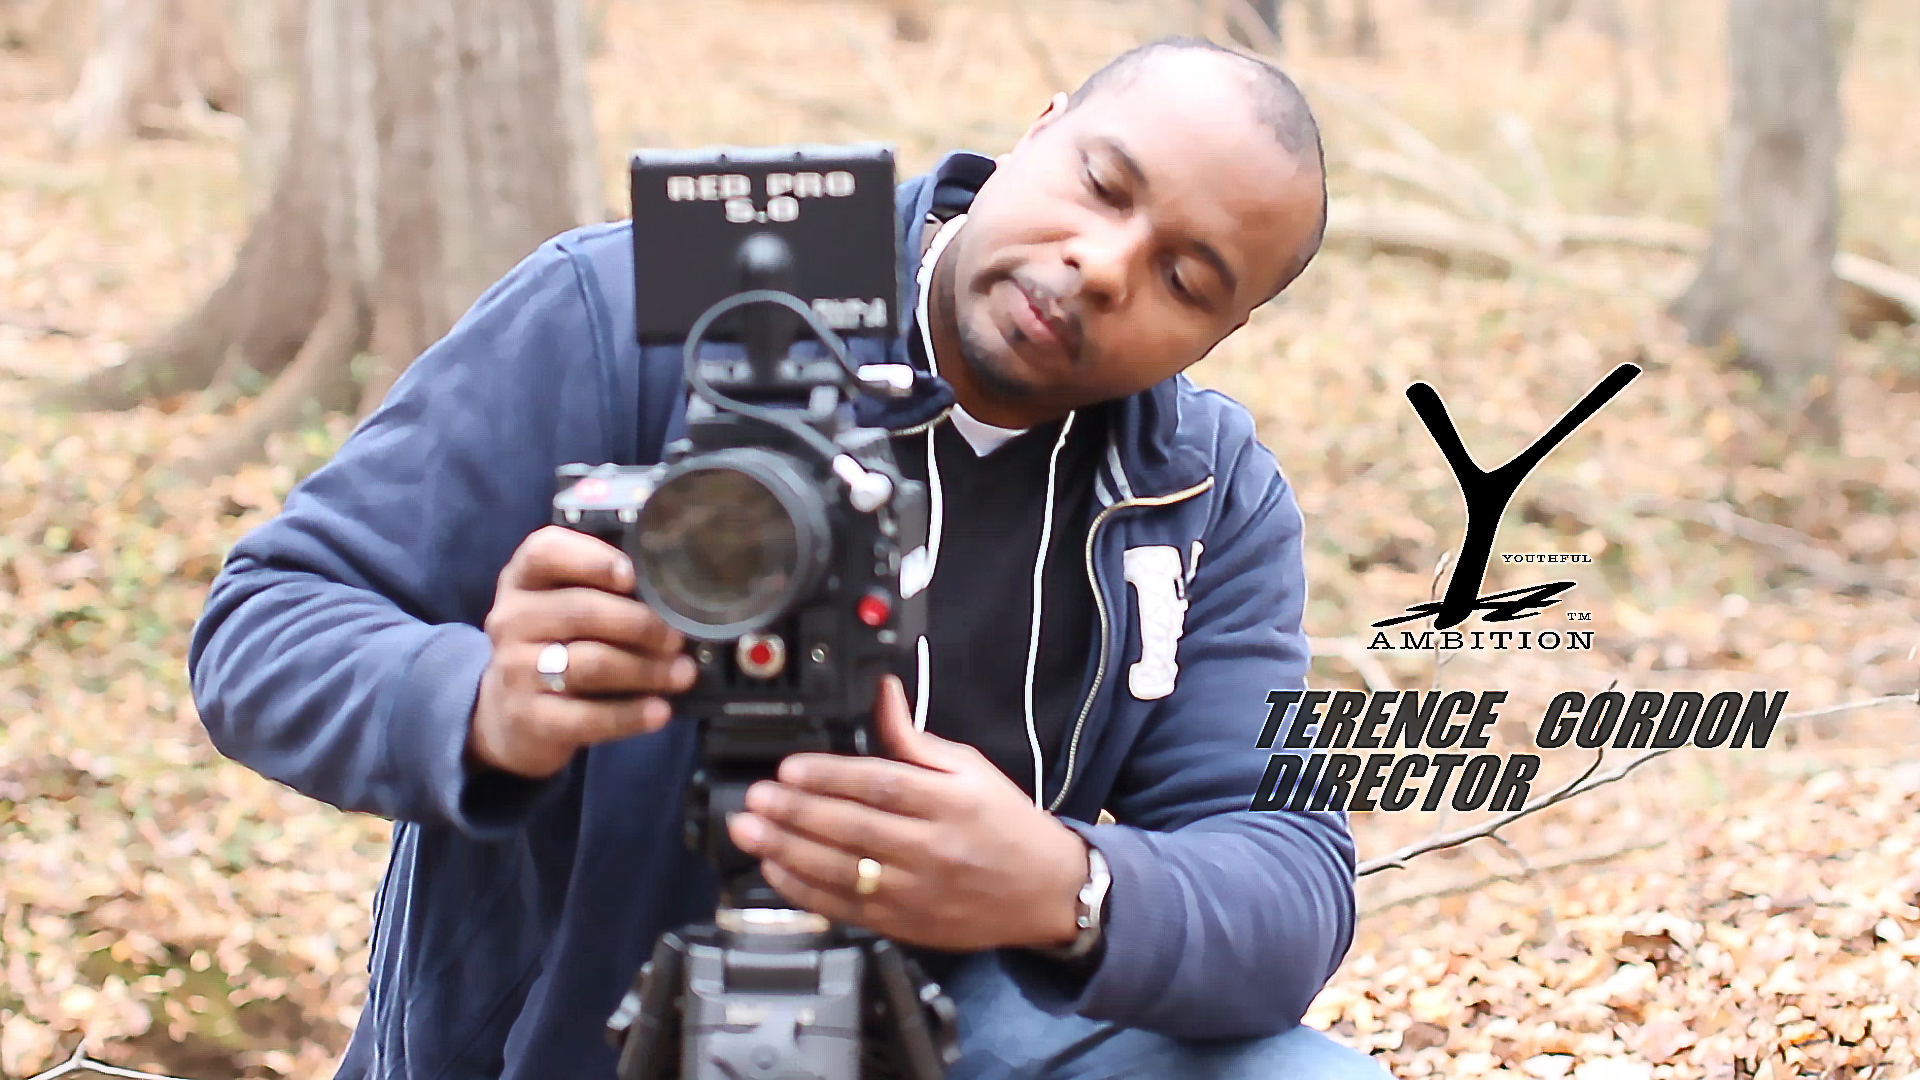 Director Terence Gordon on set of Youthful Ambition in the Carolina's.